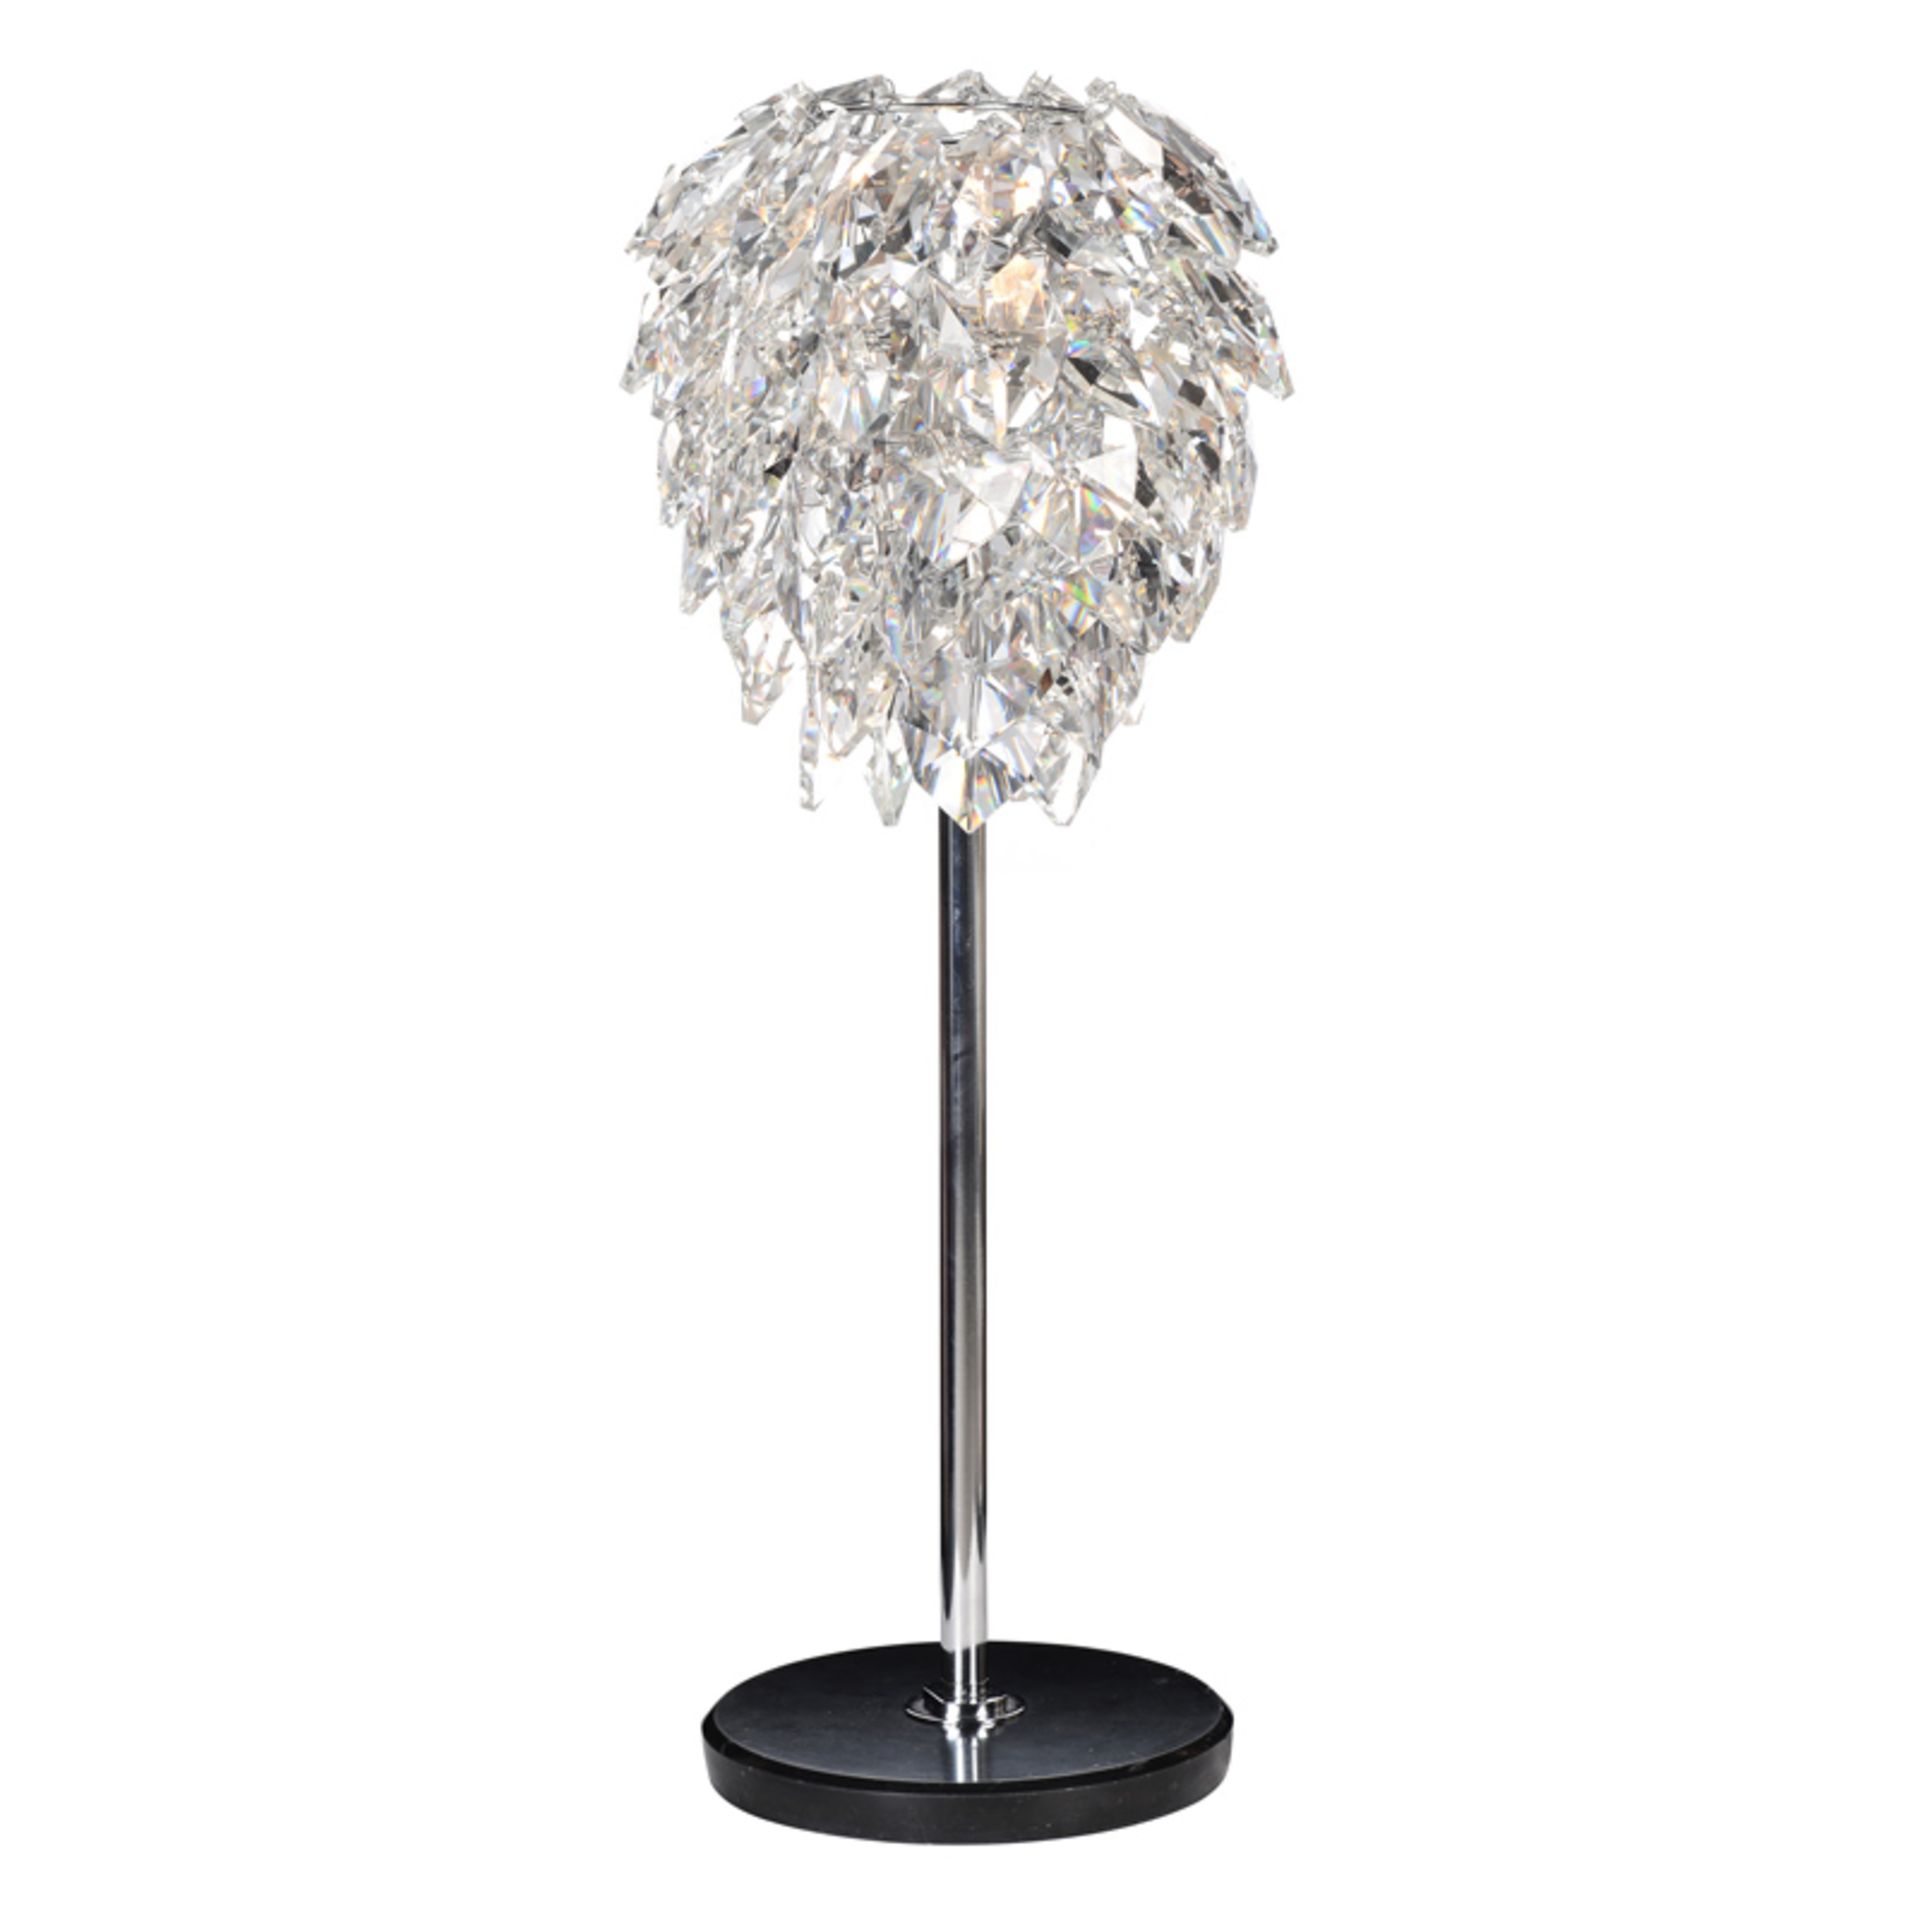 Pharaoh Petals Table Lamp (EU) Frosted A Stunning Luminaire Petals Are Formed By Lenses That